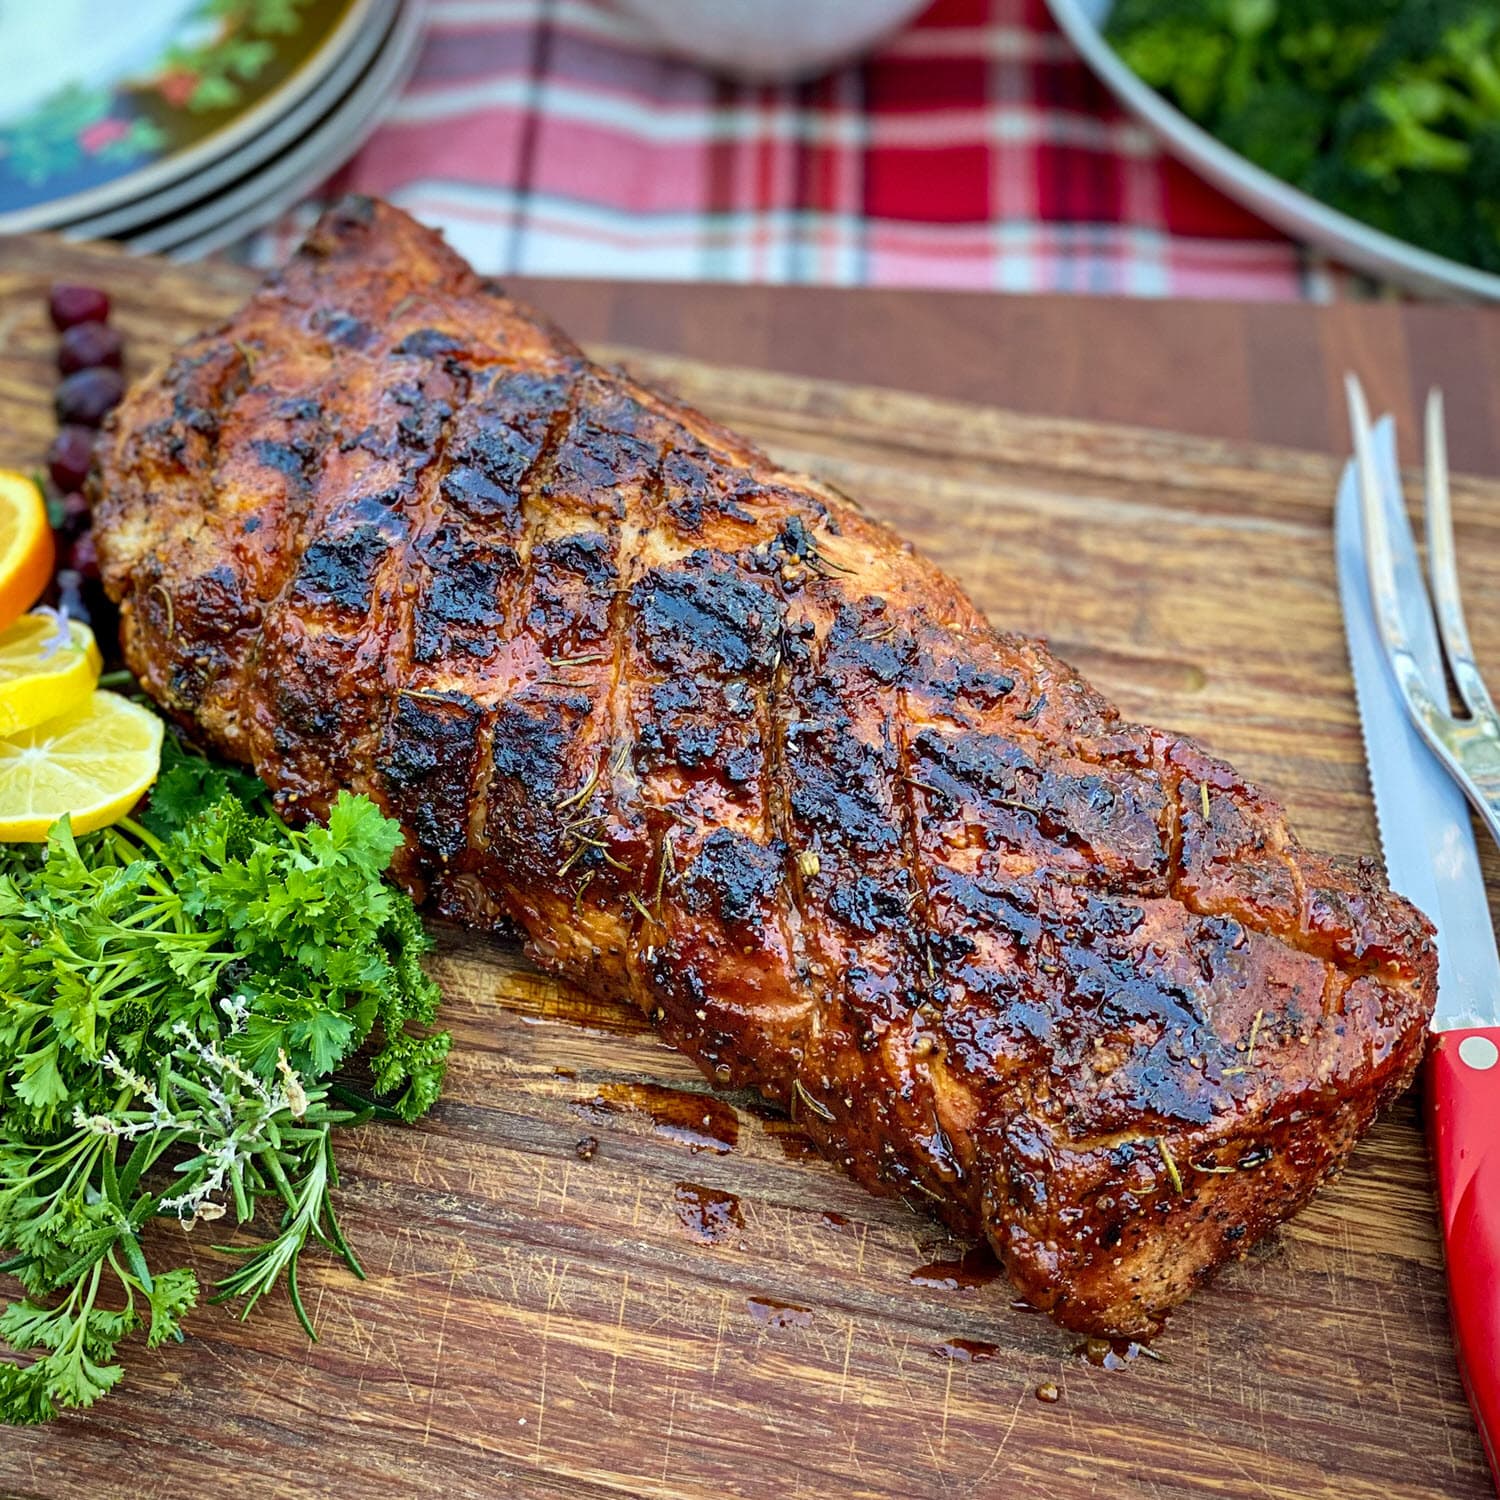 Cherry Smoked Pork Loin with glaze on cutting board with parsley